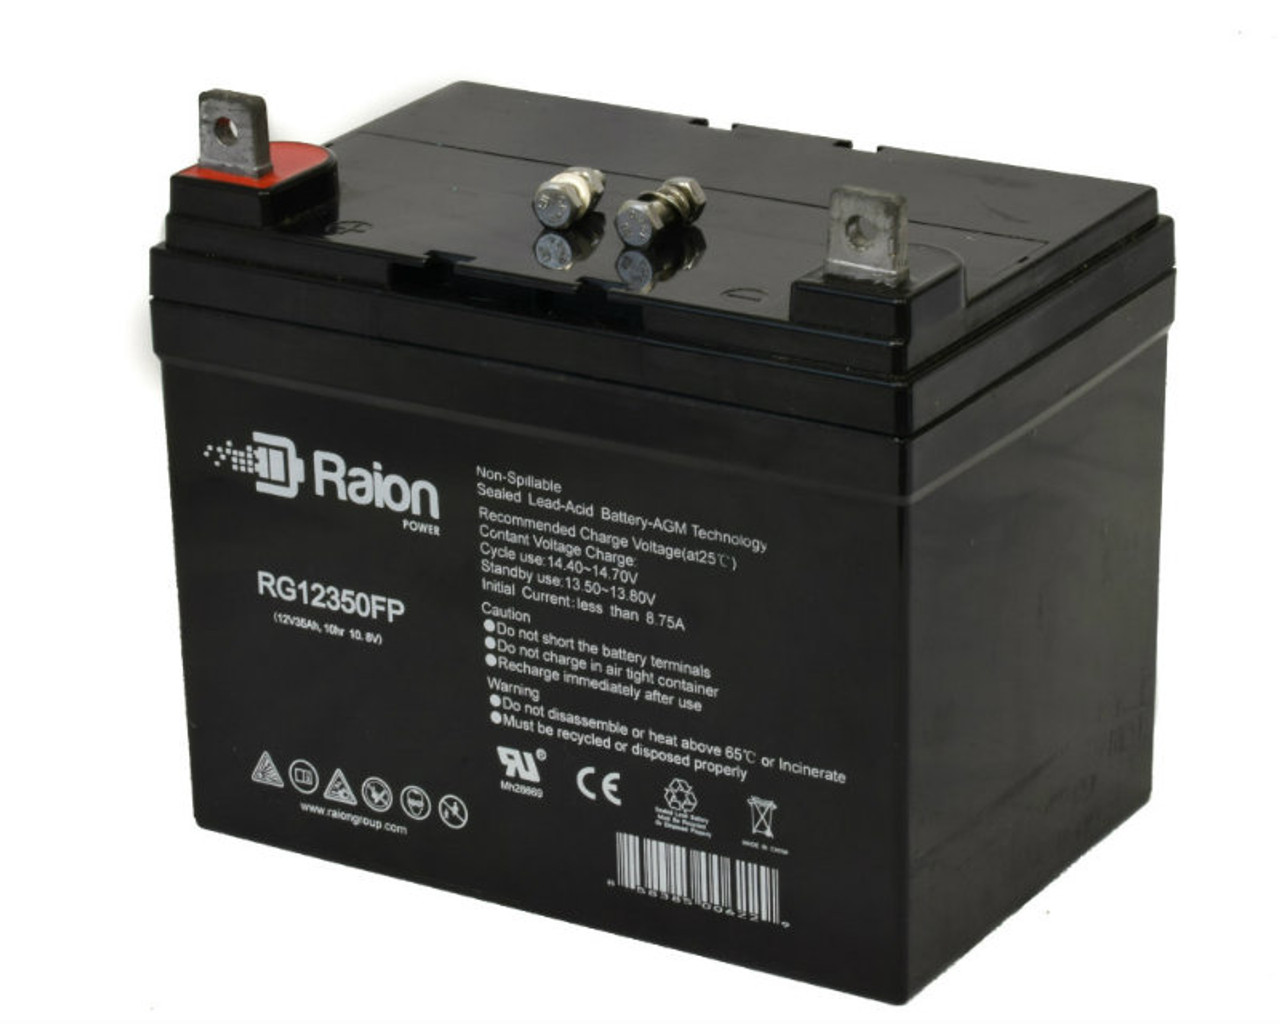 Raion Power Replacement 12V 35Ah Battery for Excel 8A-U1 - 1 Pack